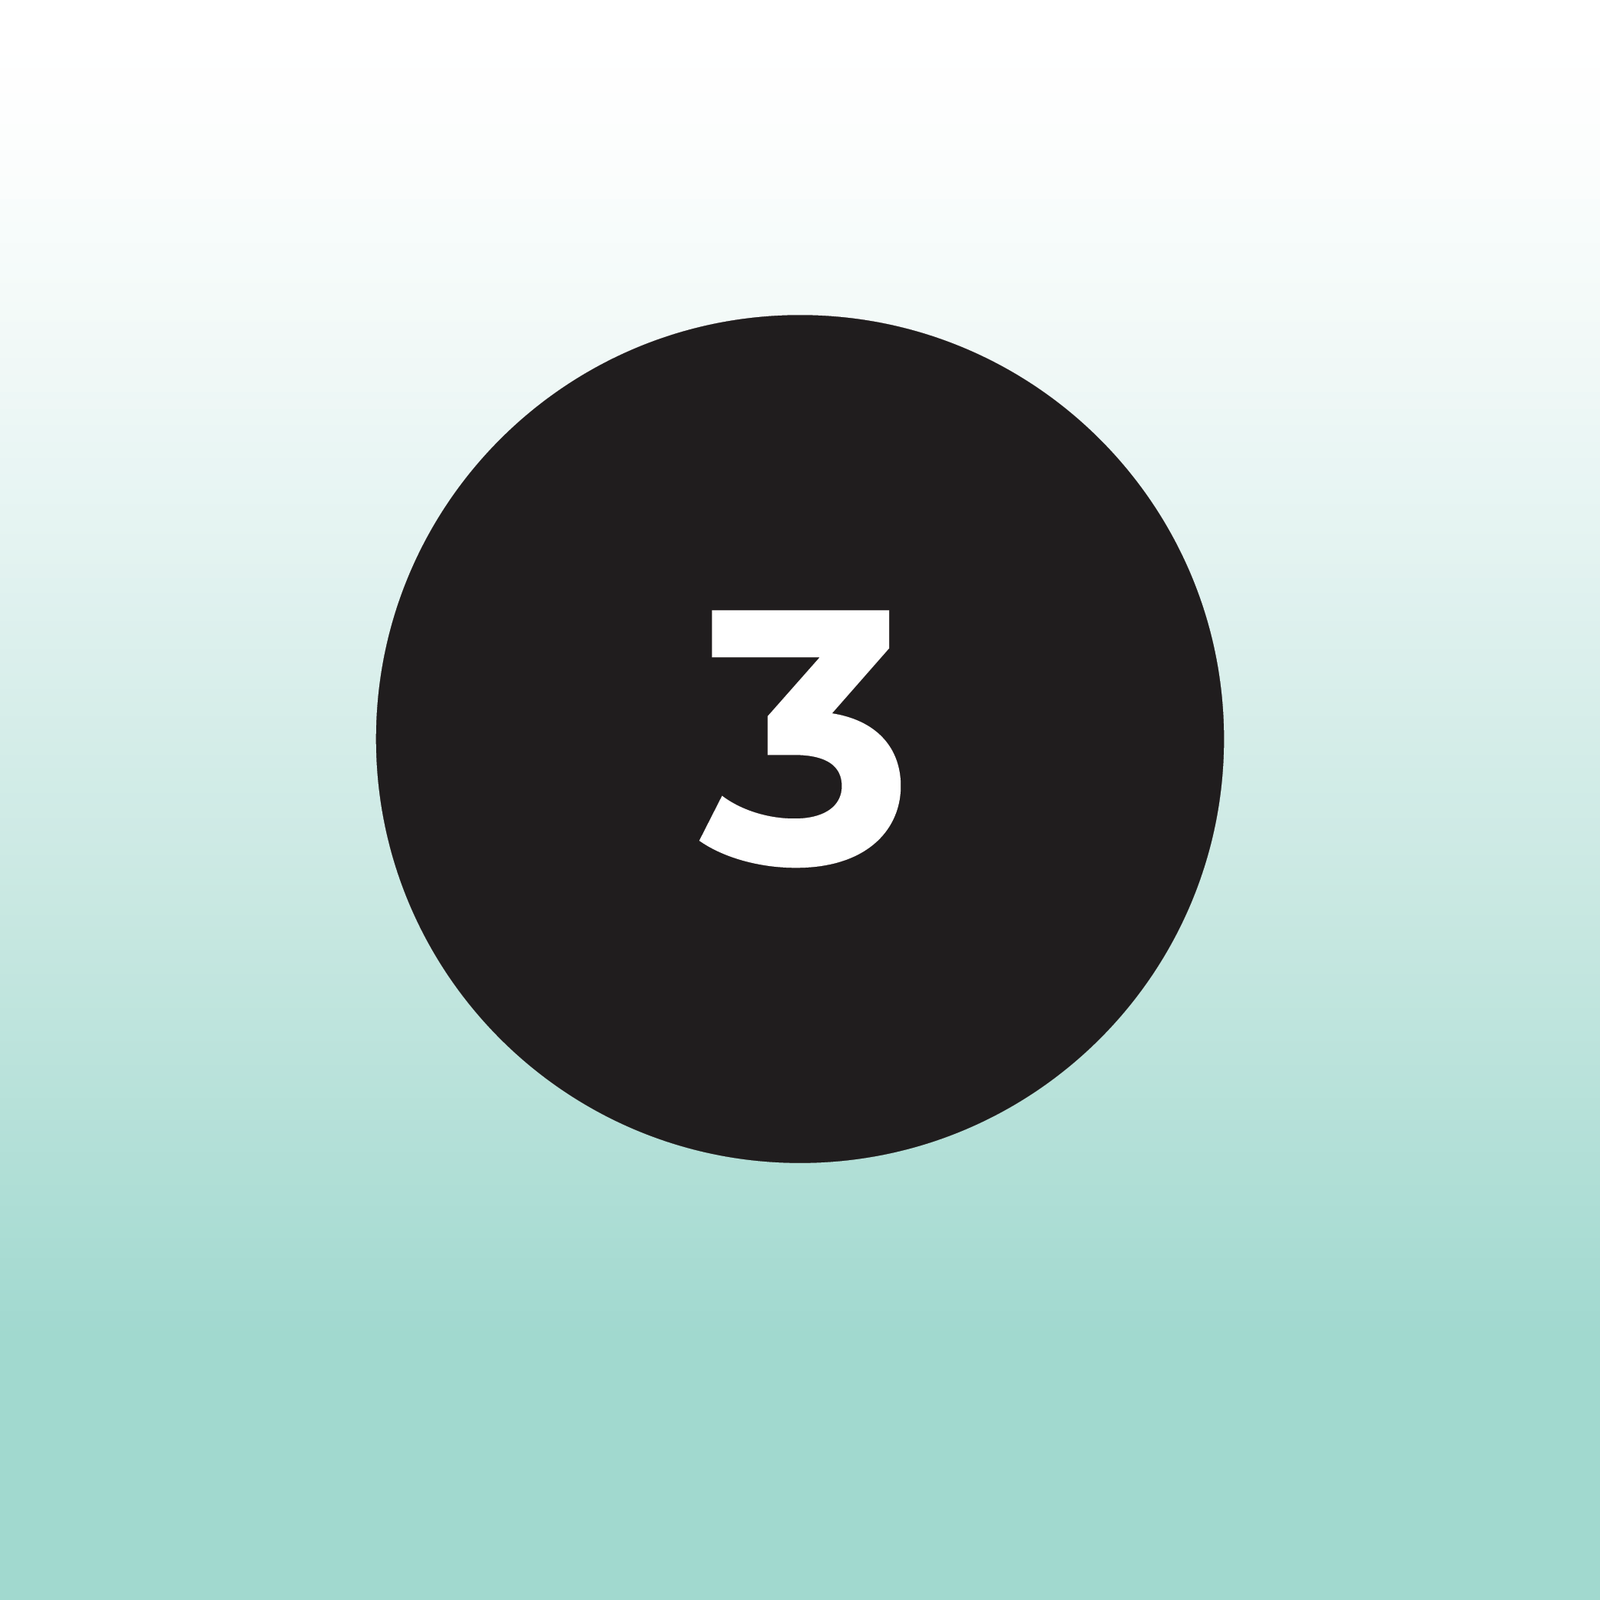 teal gradient background with a black circle and the number 3 in white in the center